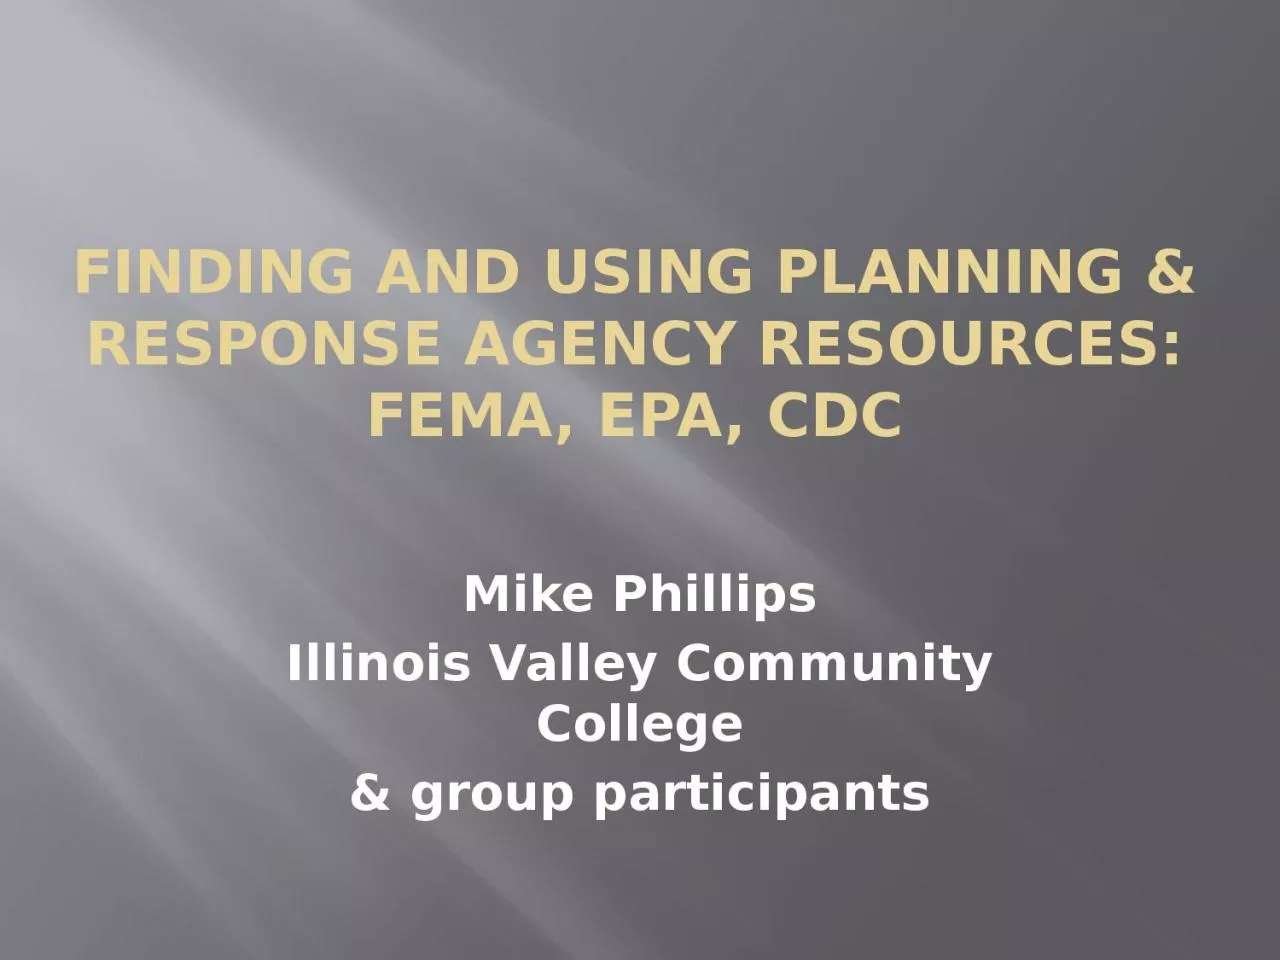 Finding and Using Planning & Response Agency Resources: